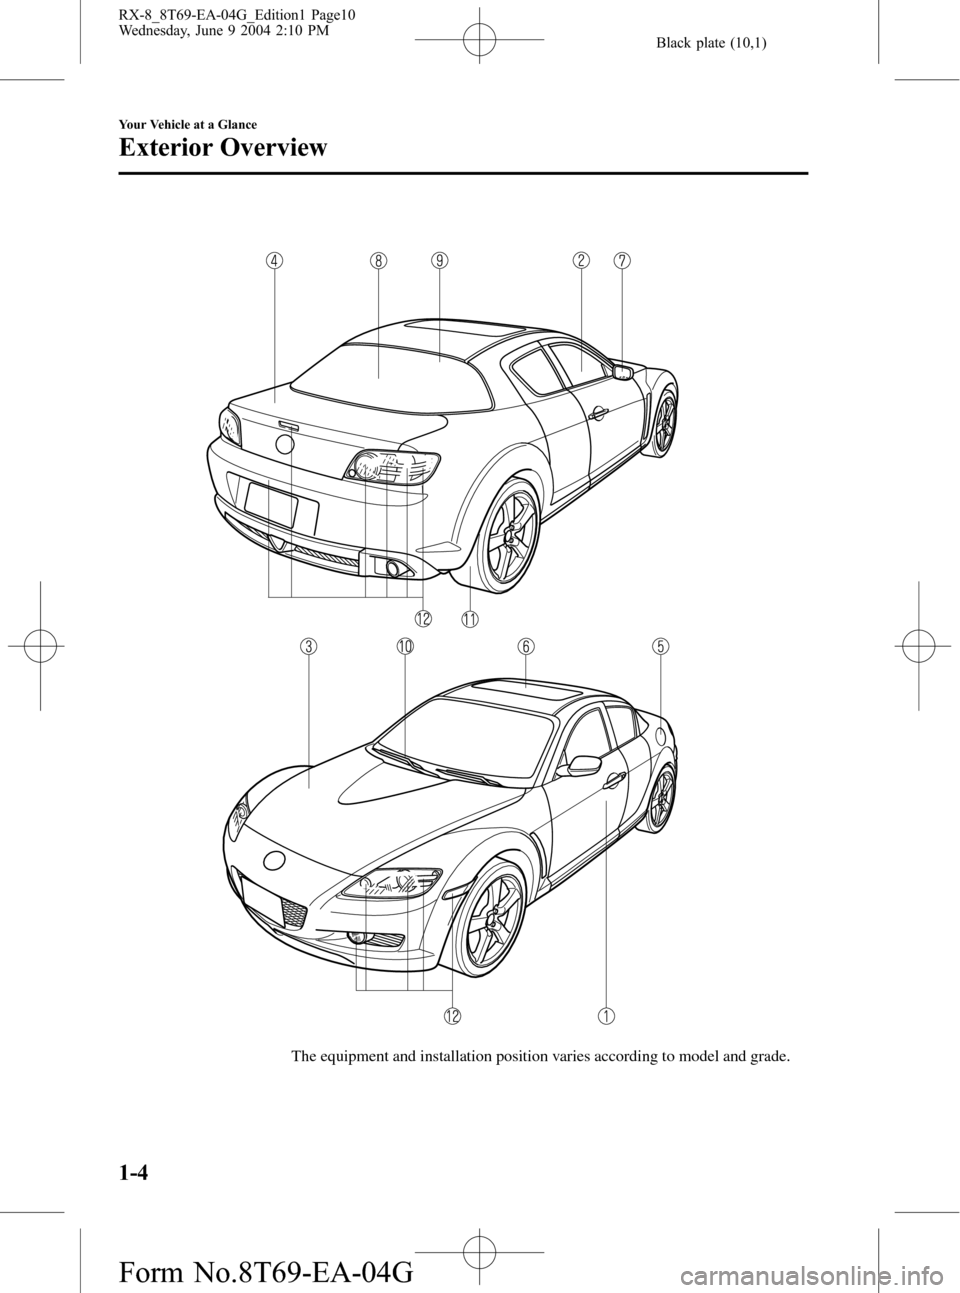 MAZDA MODEL RX 8 2005  Owners Manual (in English) Black plate (10,1)
The equipment and installation position varies according to model and grade.
1-4
Your Vehicle at a Glance
Exterior Overview
RX-8_8T69-EA-04G_Edition1 Page10
Wednesday, June 9 2004 2